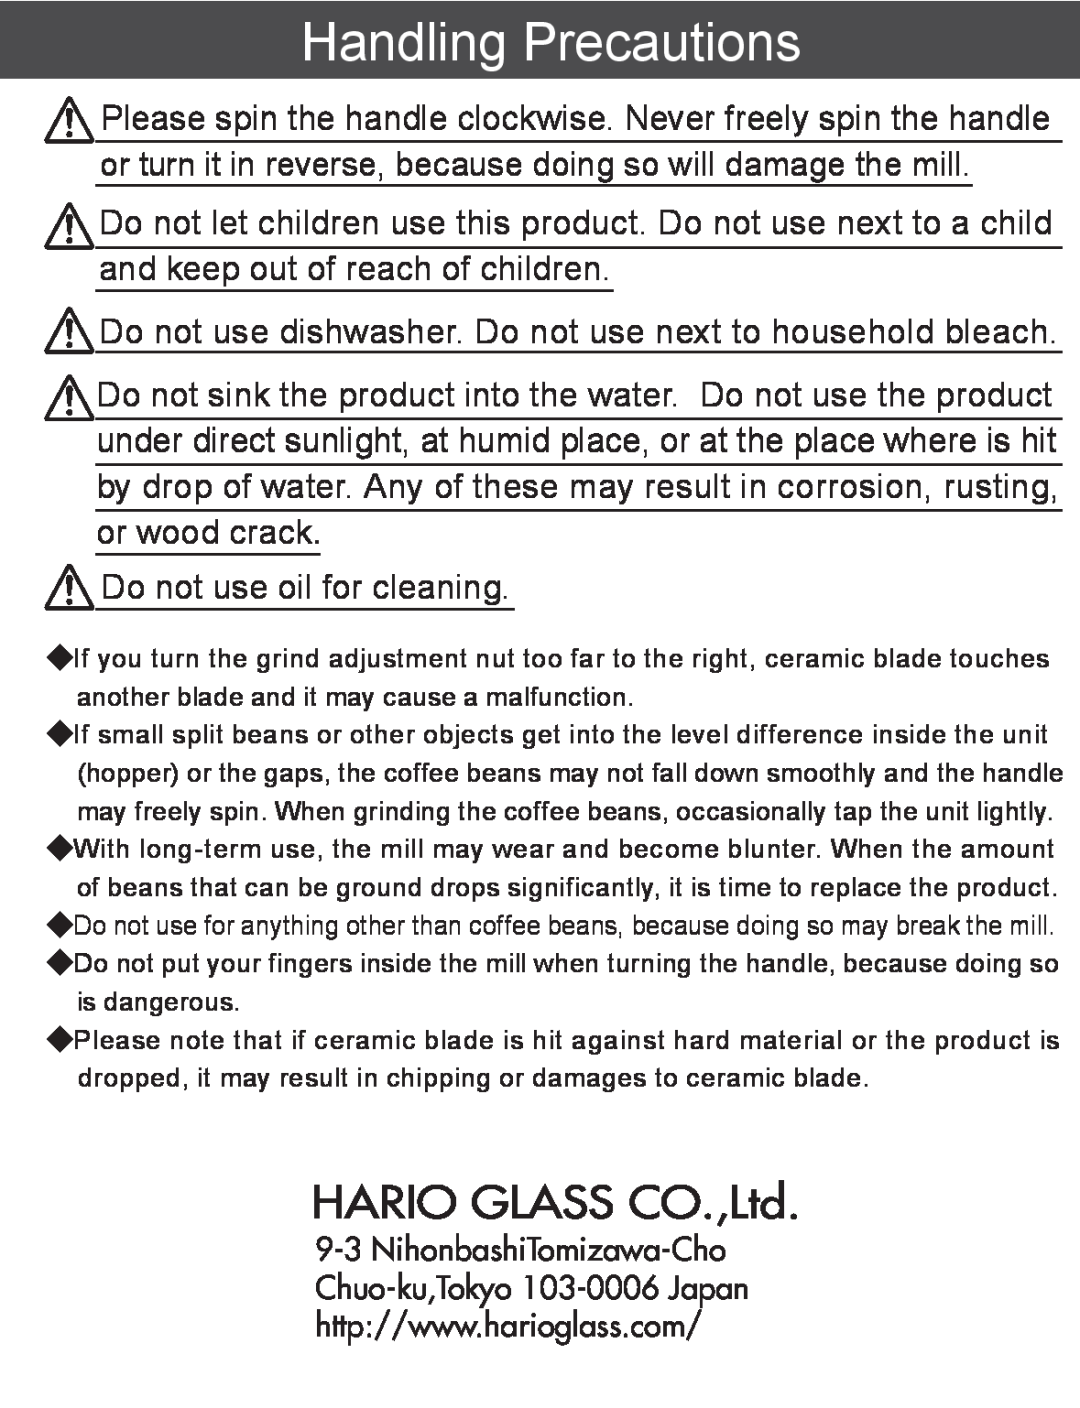 Hario Glass MSS-1 1101 instruction manual Handling Precautions, Do not use dishwasher. Do not use next to household bleach 